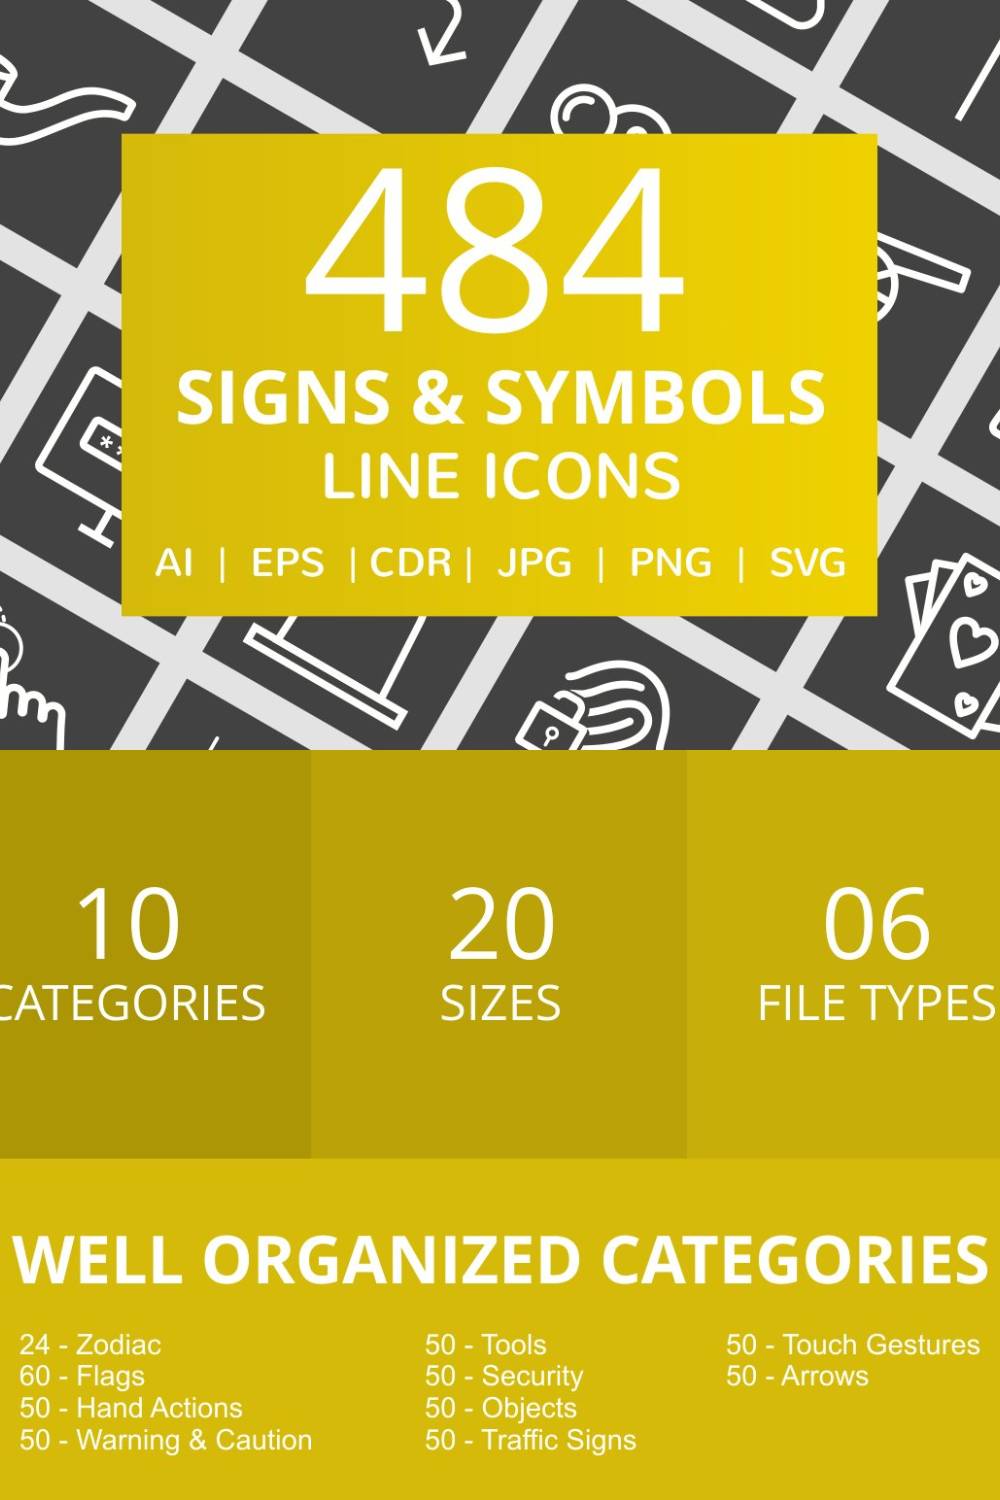 484 Signs & Symbols Line Icons Pinterest Cover.